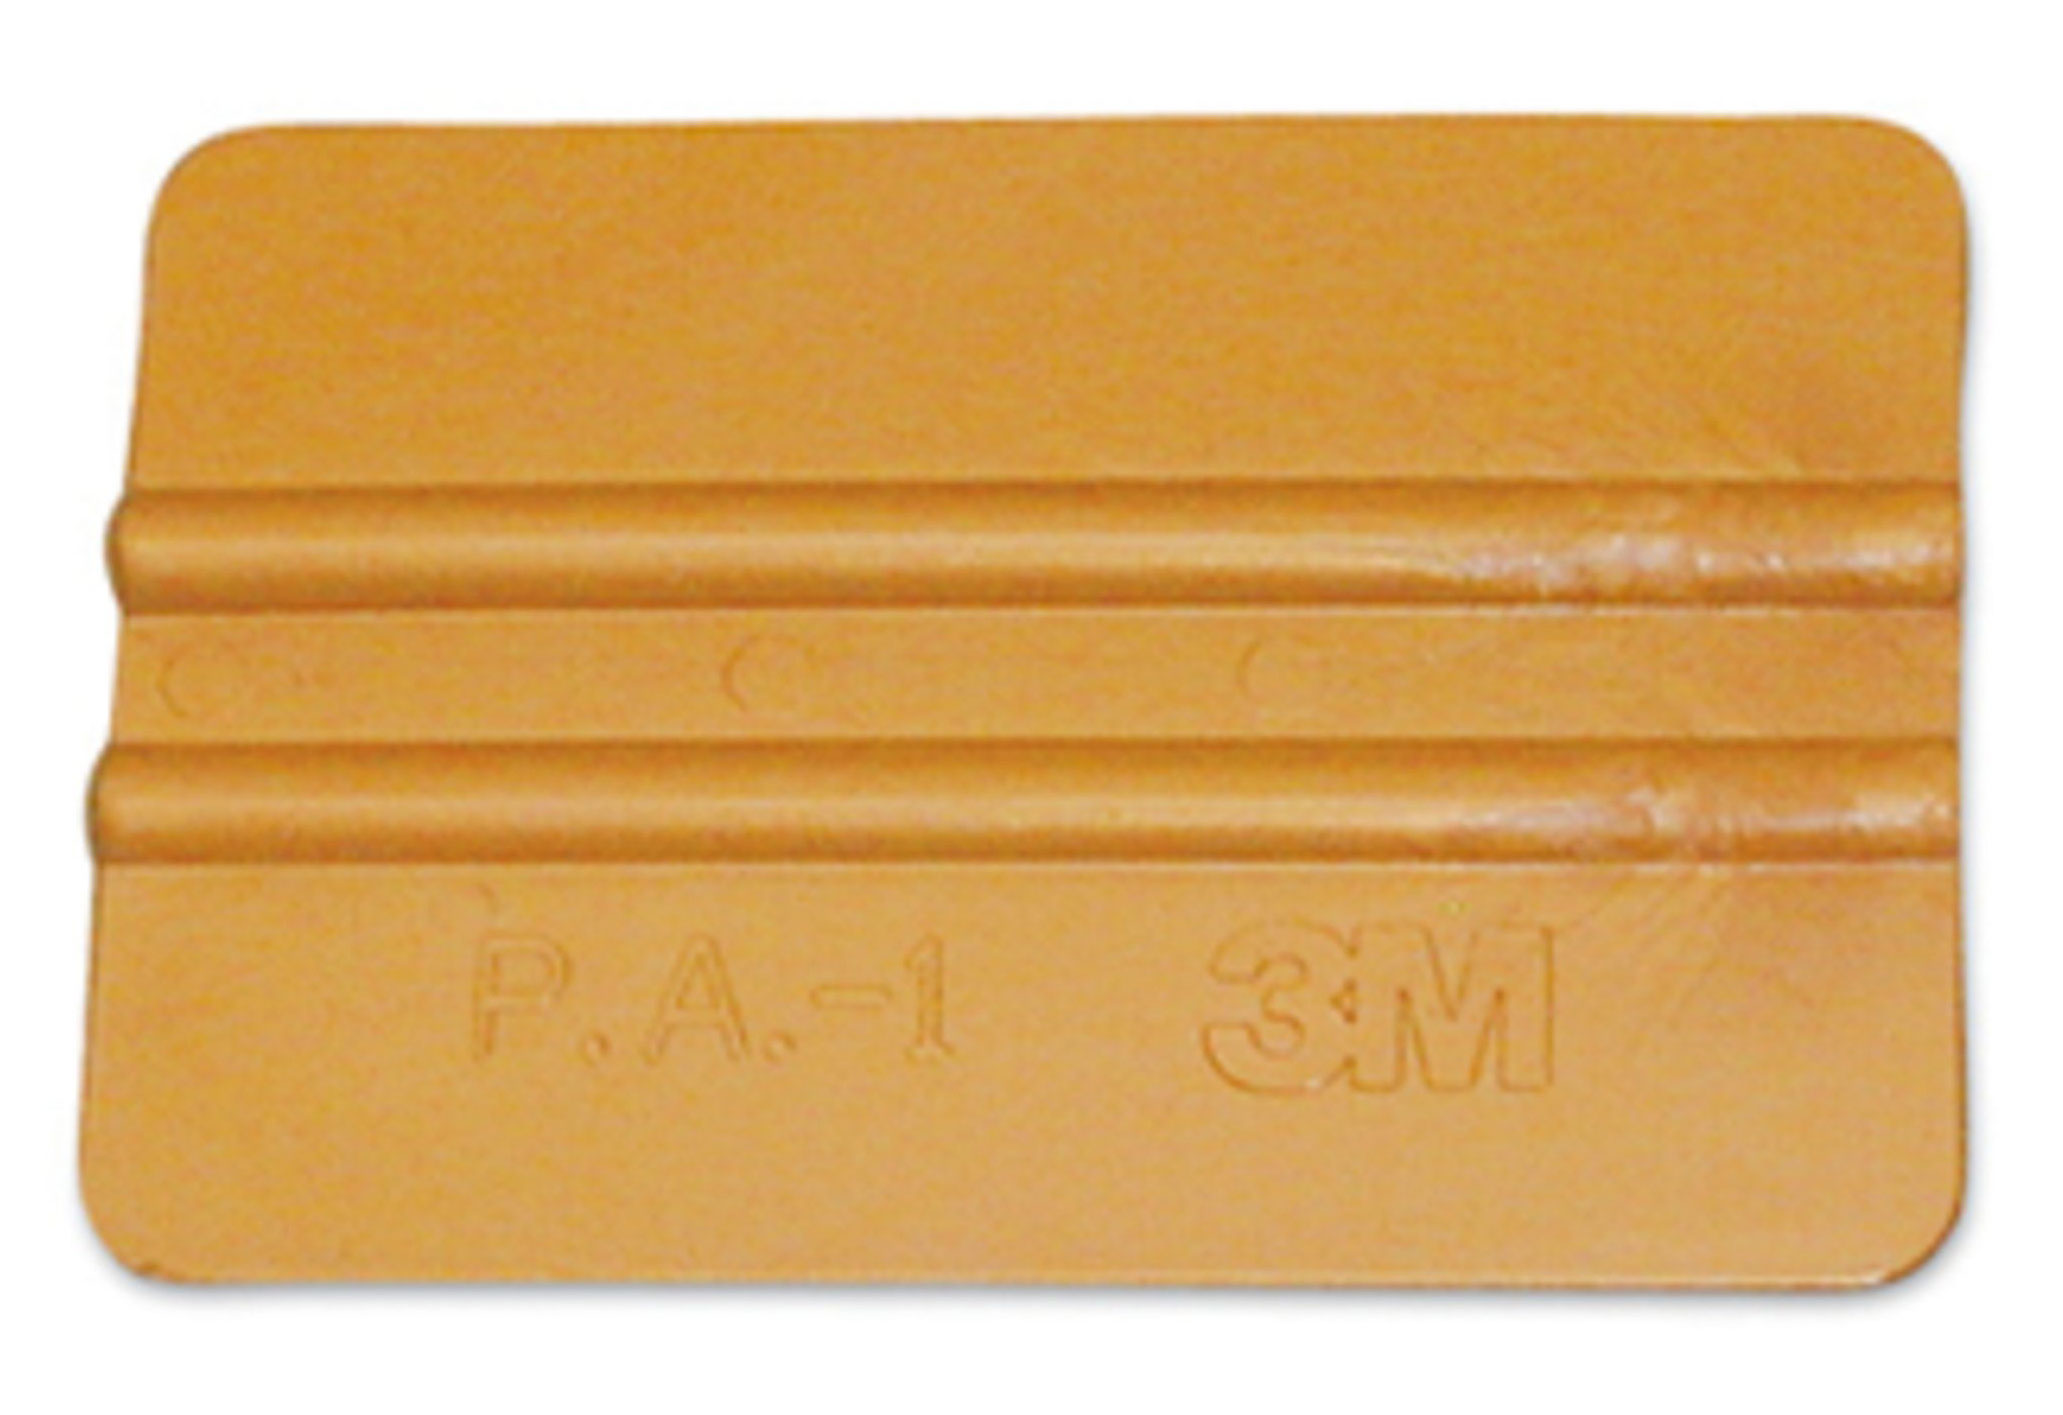 Shop 25 Pk 3M PA-1 Gold Application Squeegee